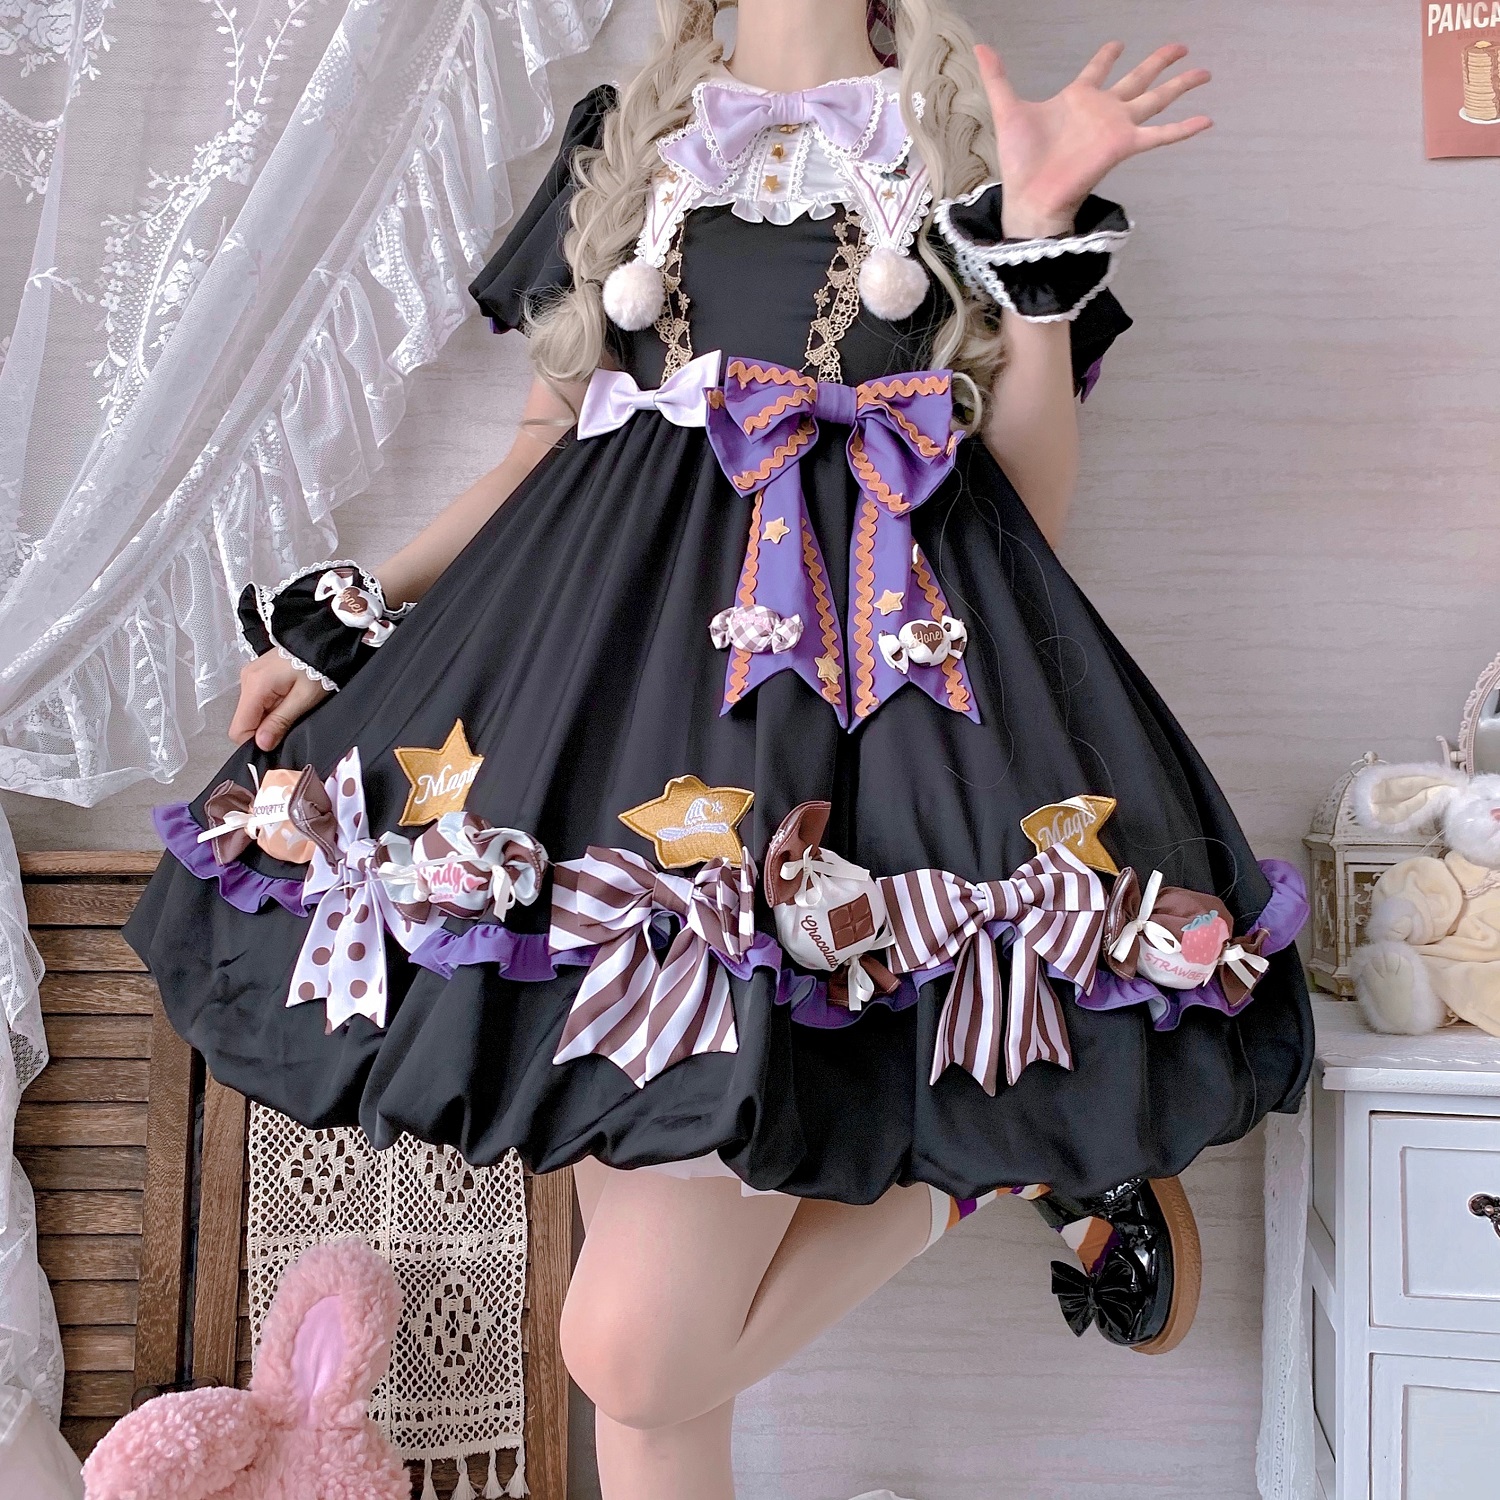 Single Skirt Black【 time freezing 】 2nd anniversary Exclusive payment candy Little witch lolita skirt op Lolita Deposit